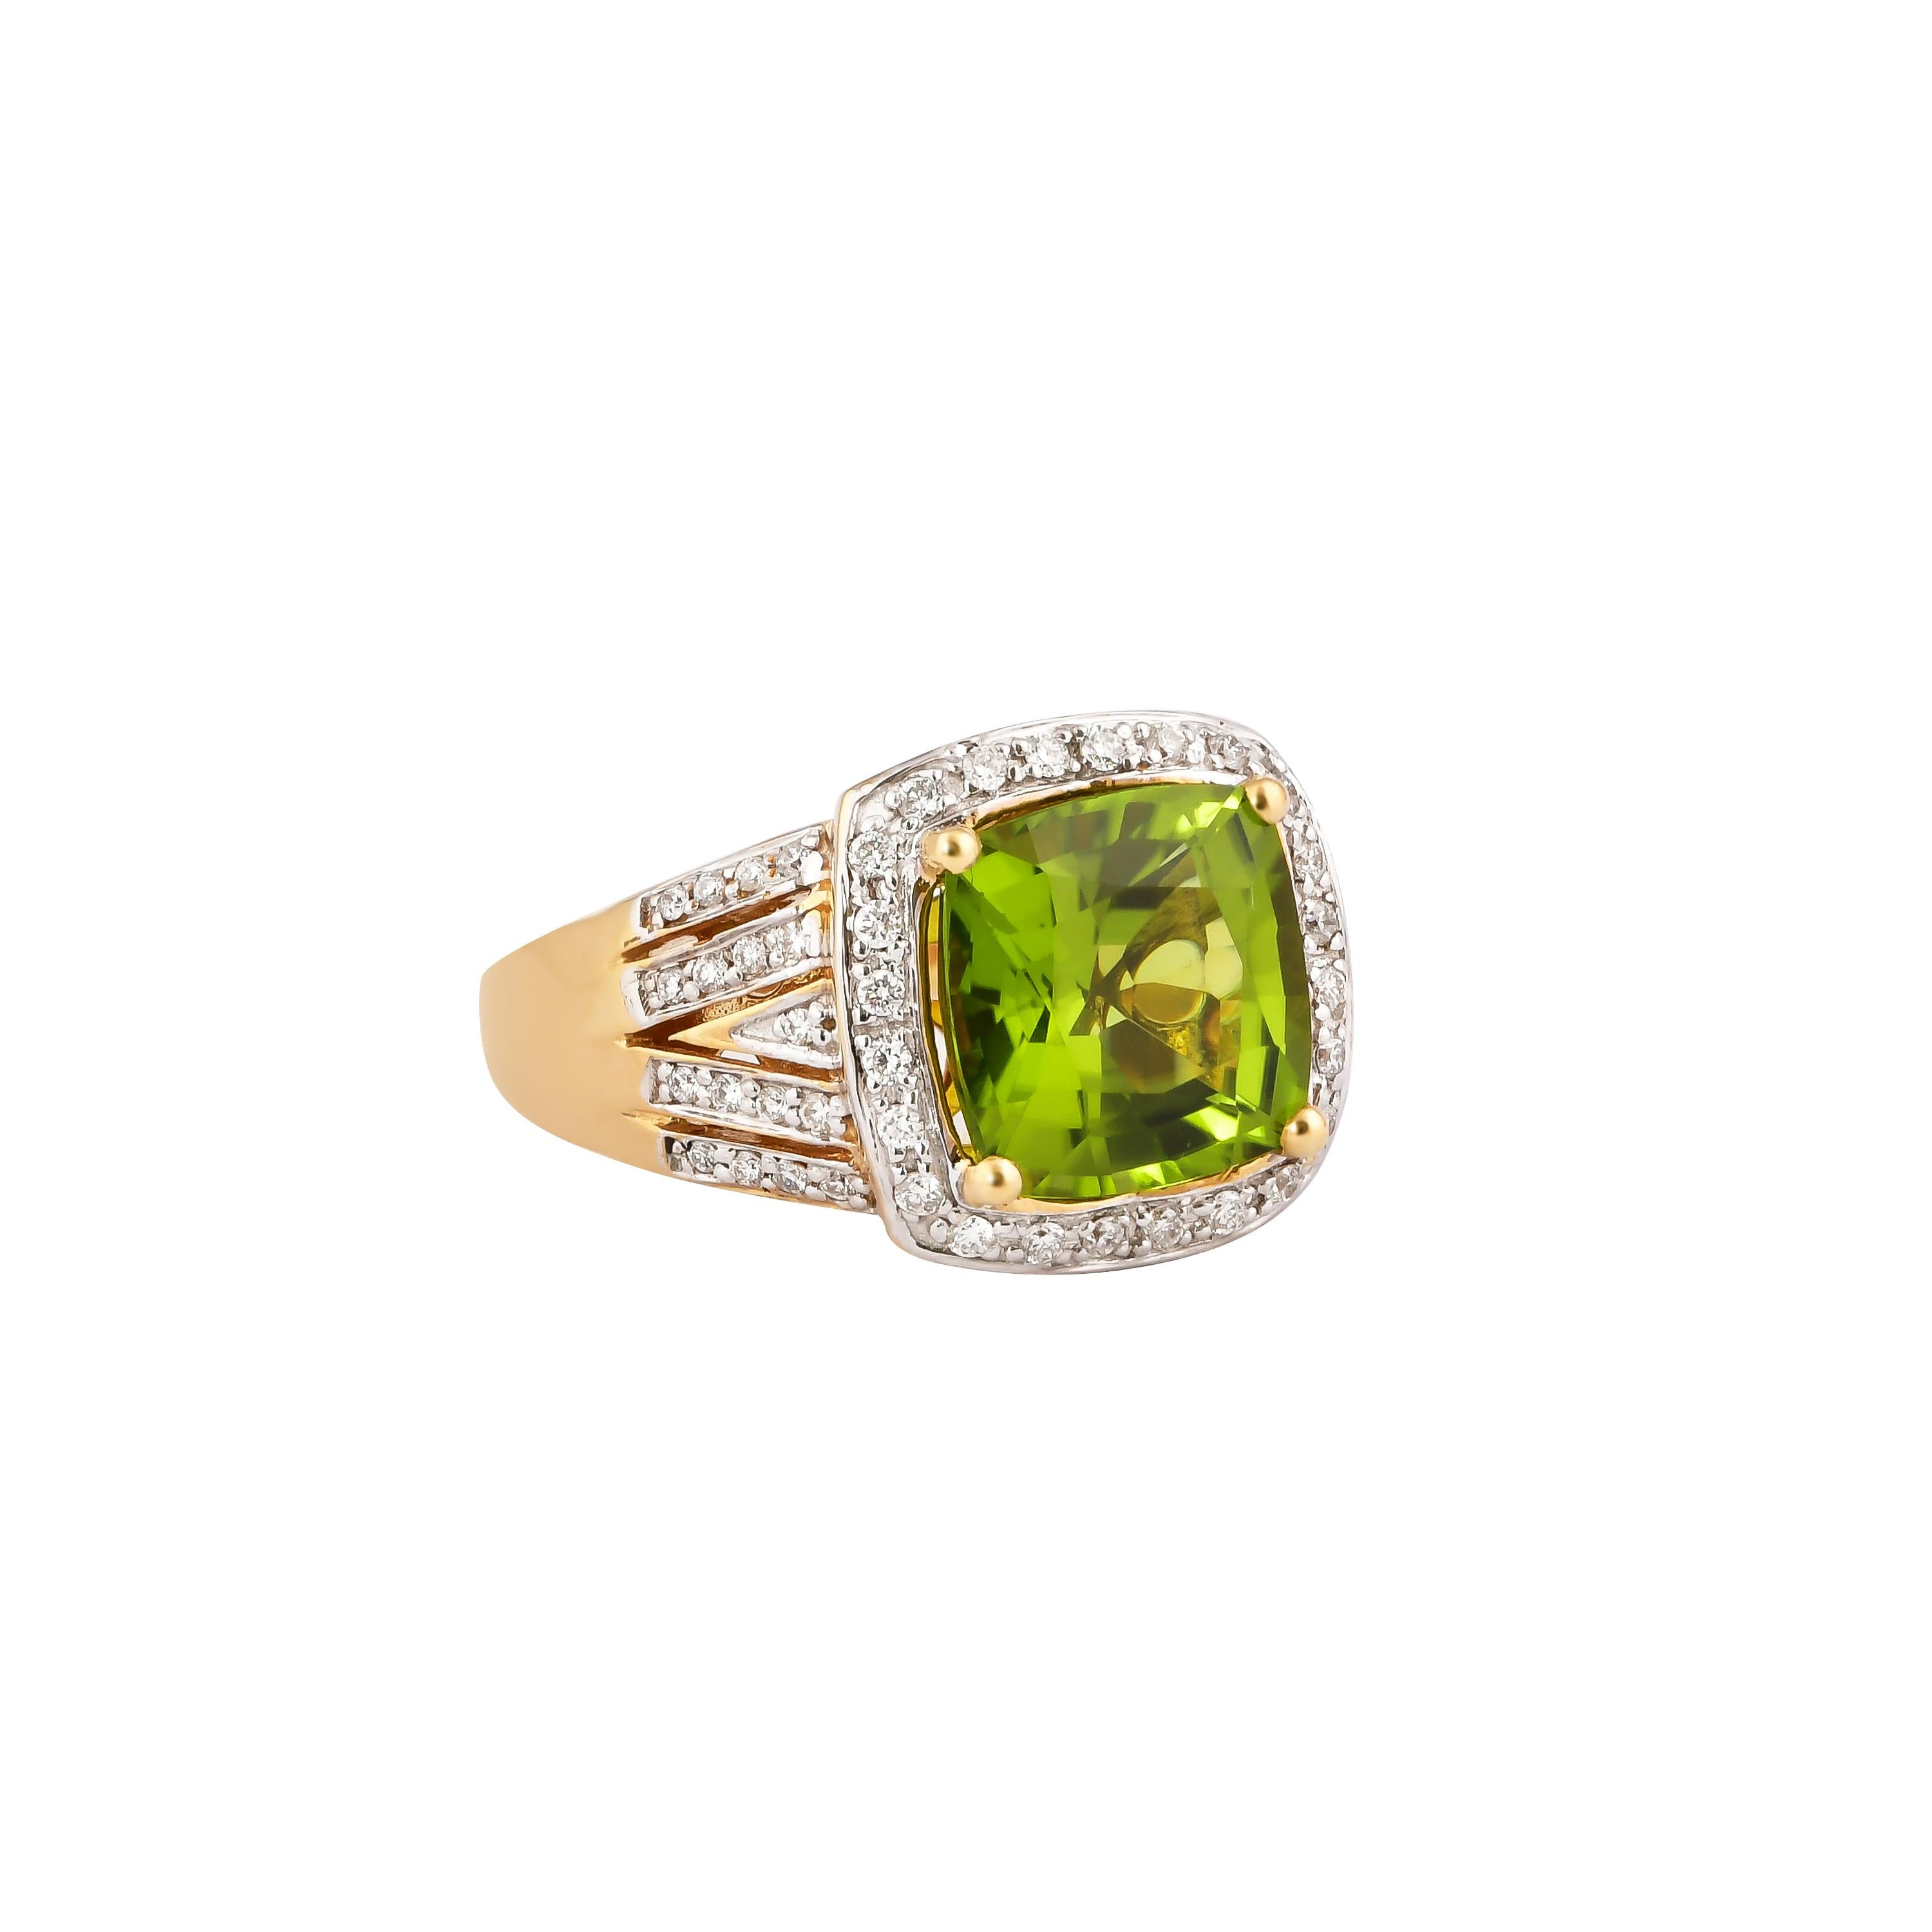 This collection features an array of pretty peridot rings! Accented with diamonds these rings are made in yellow gold and present a vibrant and fresh look. 

Classic peridot ring in 18K yellow gold with diamonds. 

Peridot: 4.760 carat cushion